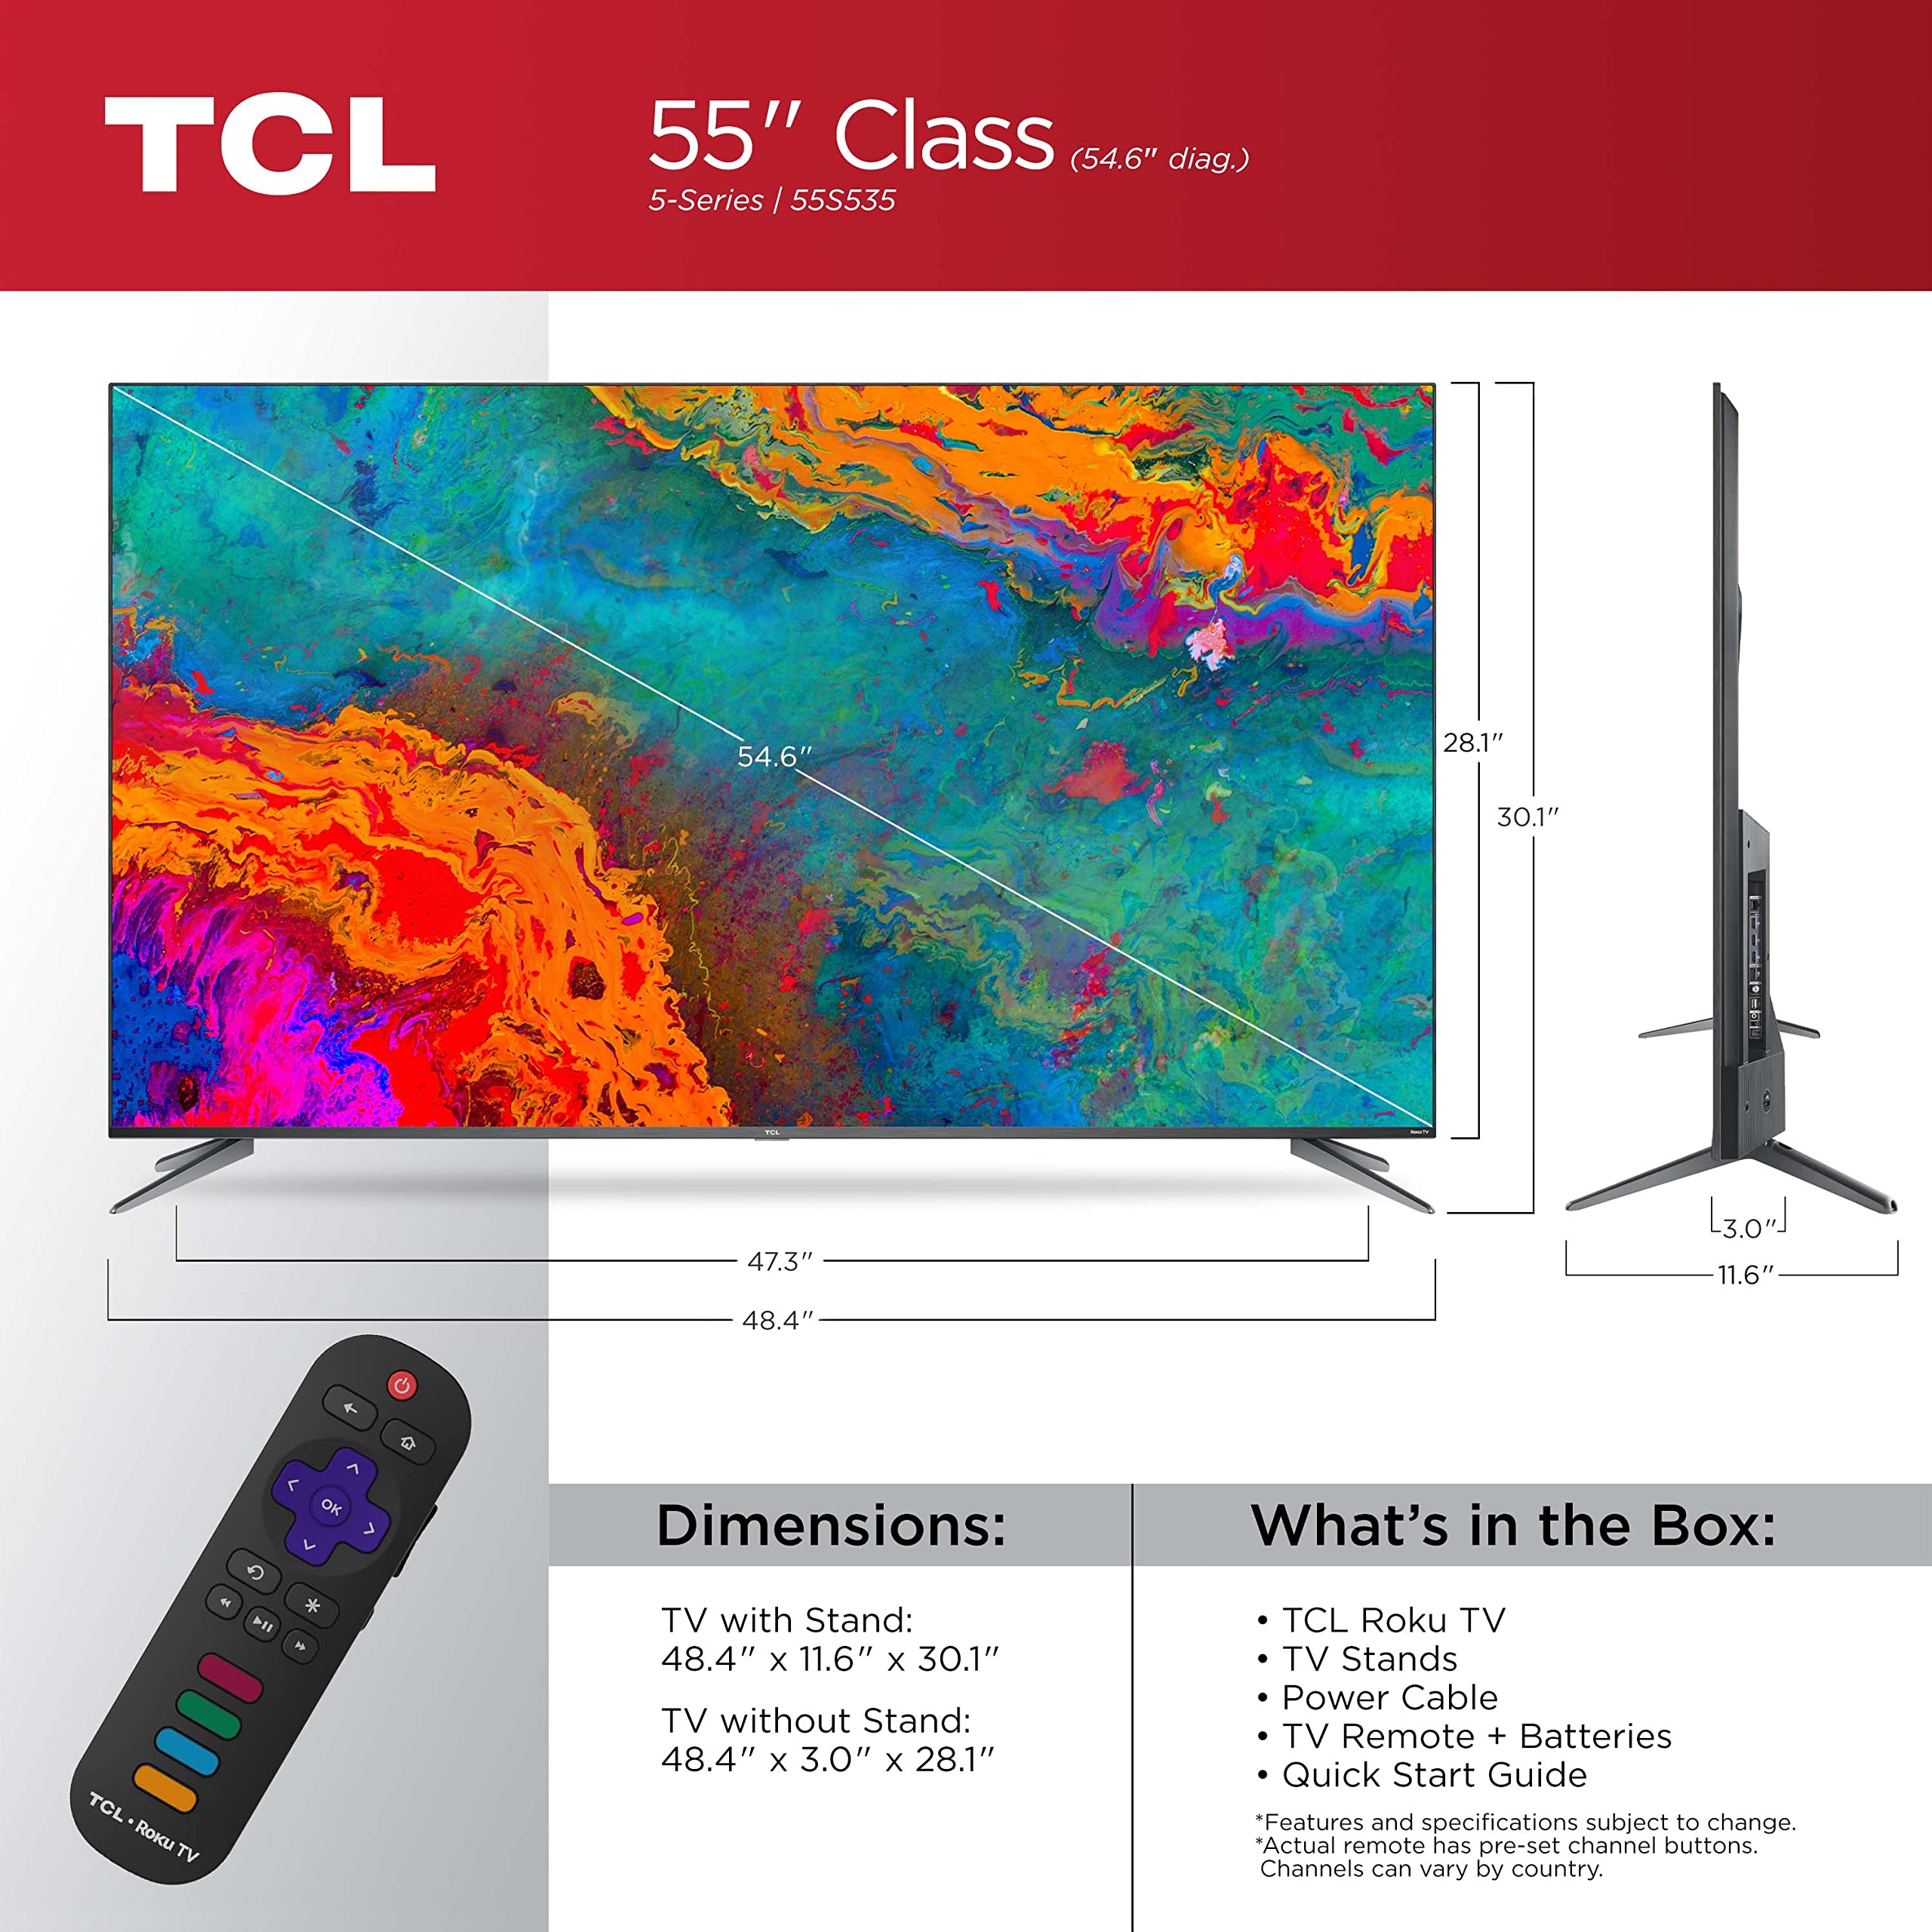 TCL 55-inch 5-Series 4K UHD Dolby Vision HDR QLED Roku Smart TV - 55S535, 2021 Model